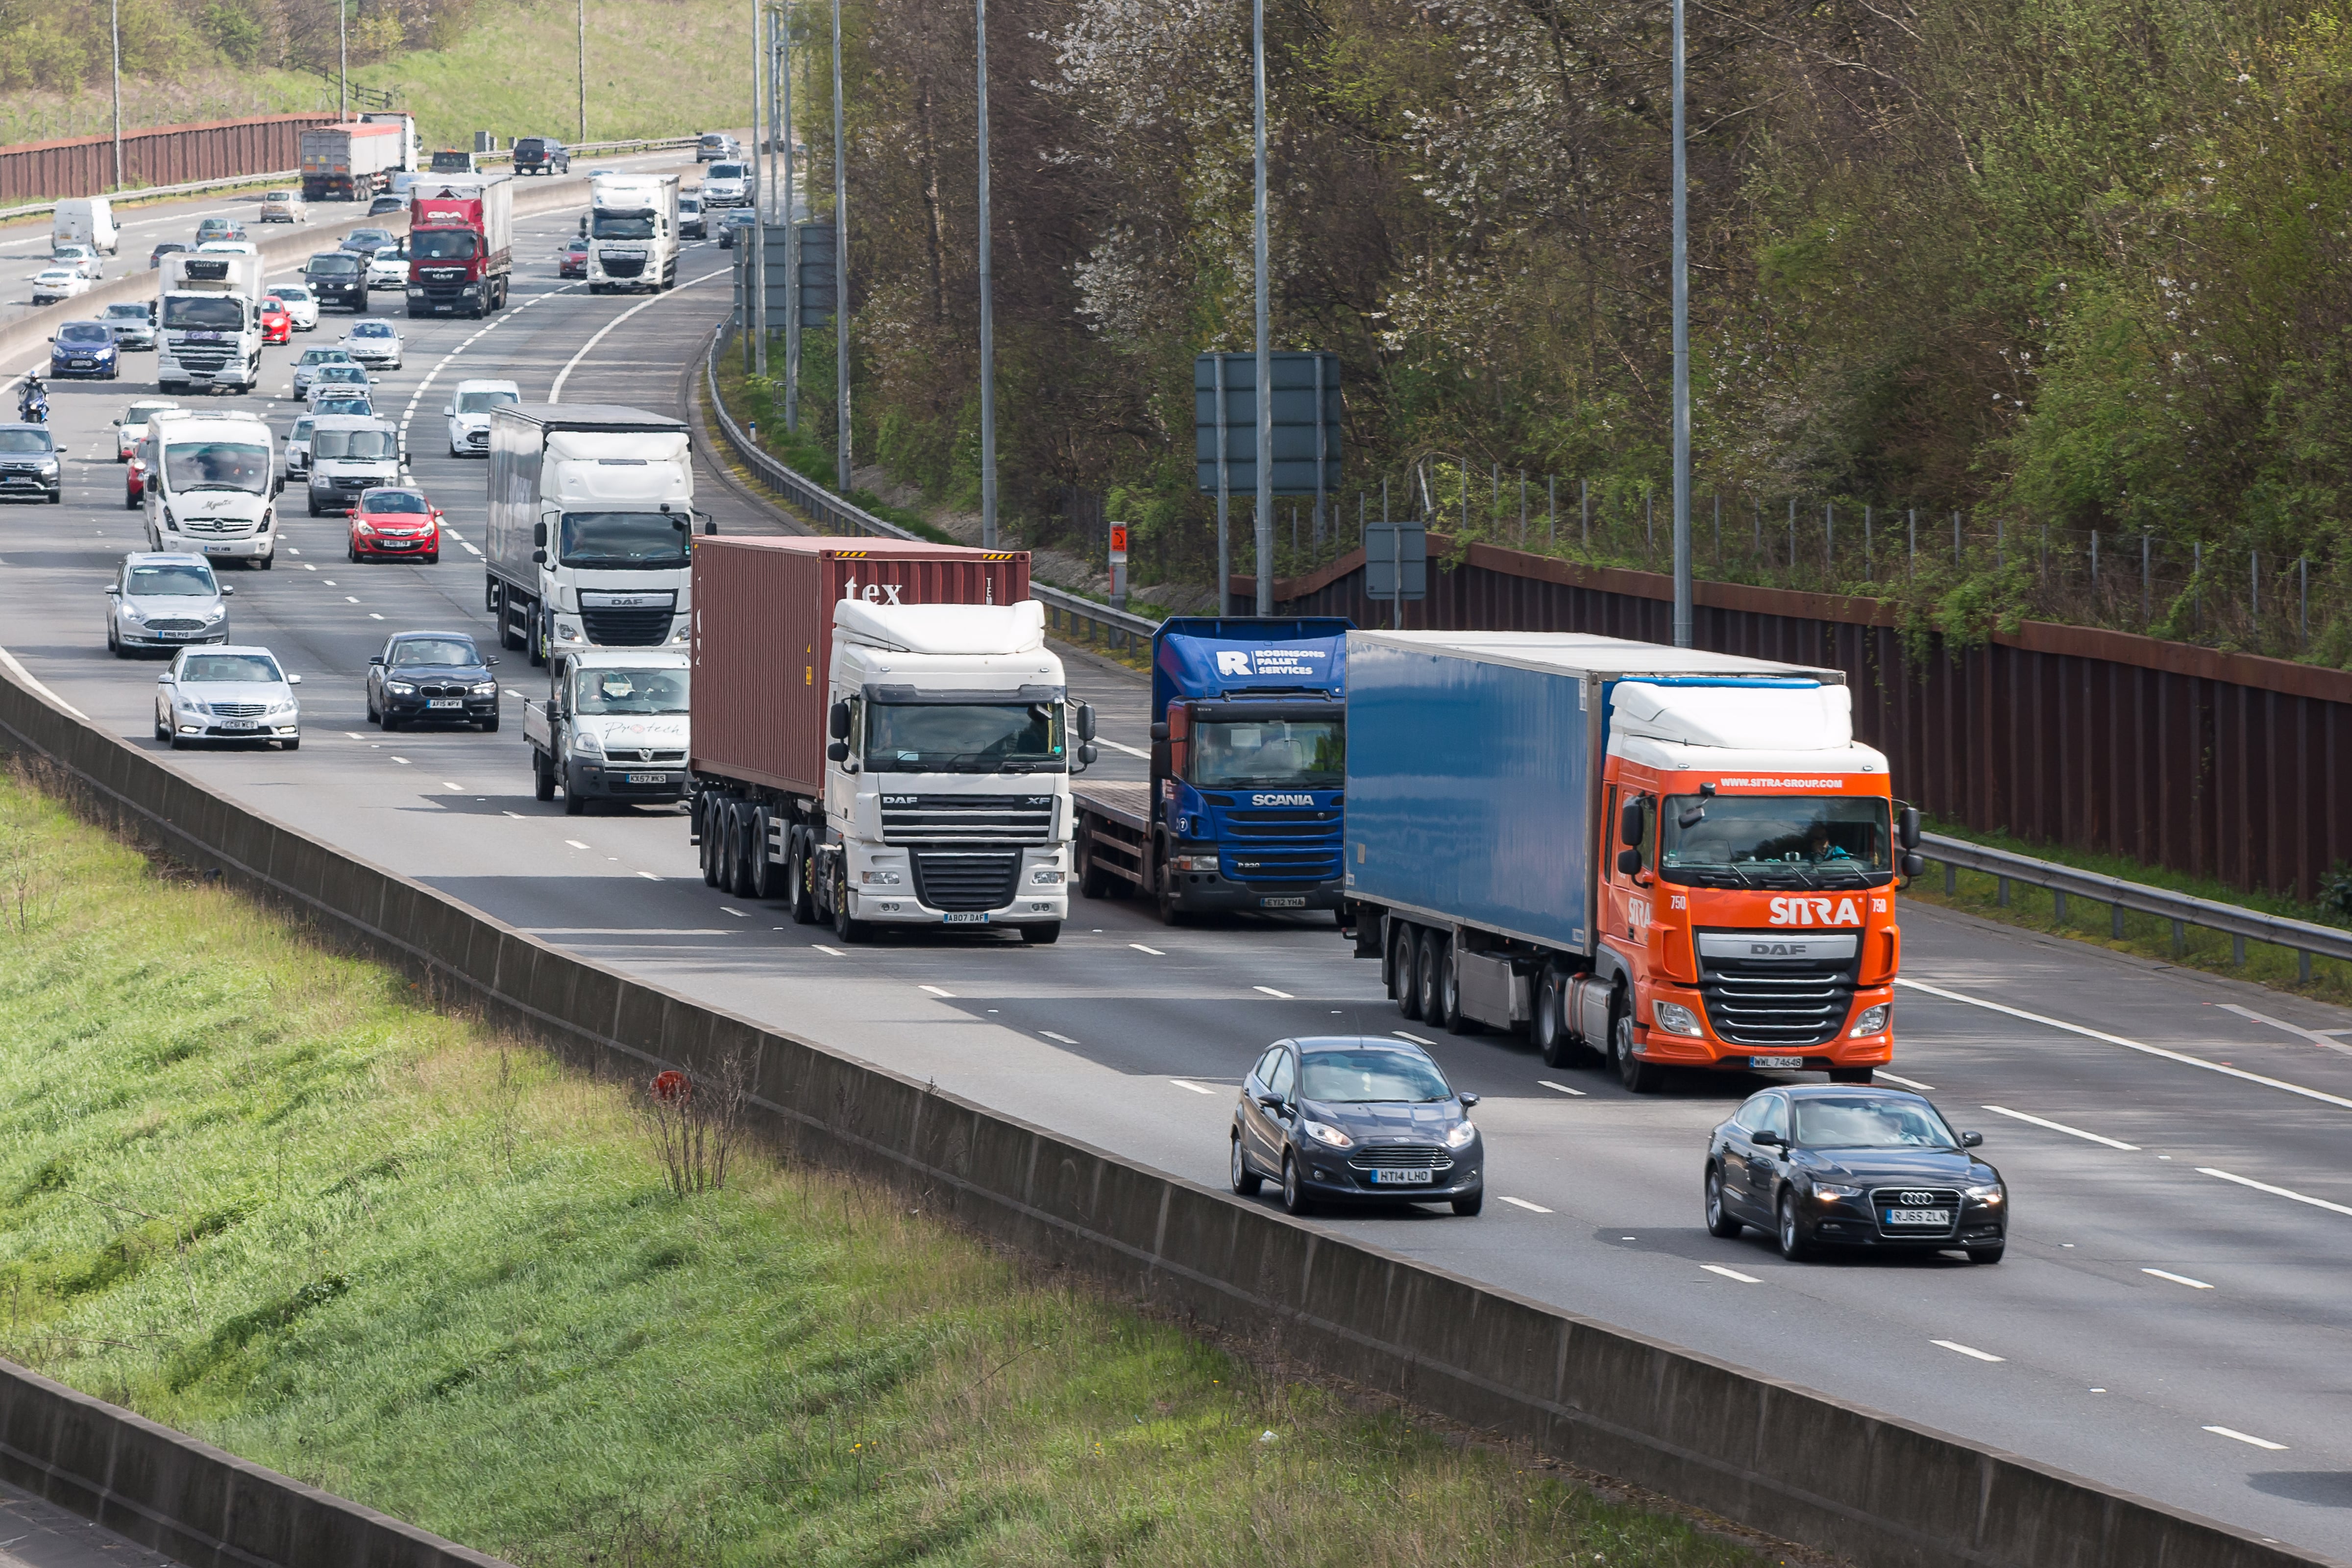 Traffic on the busiest British motorway, the M25